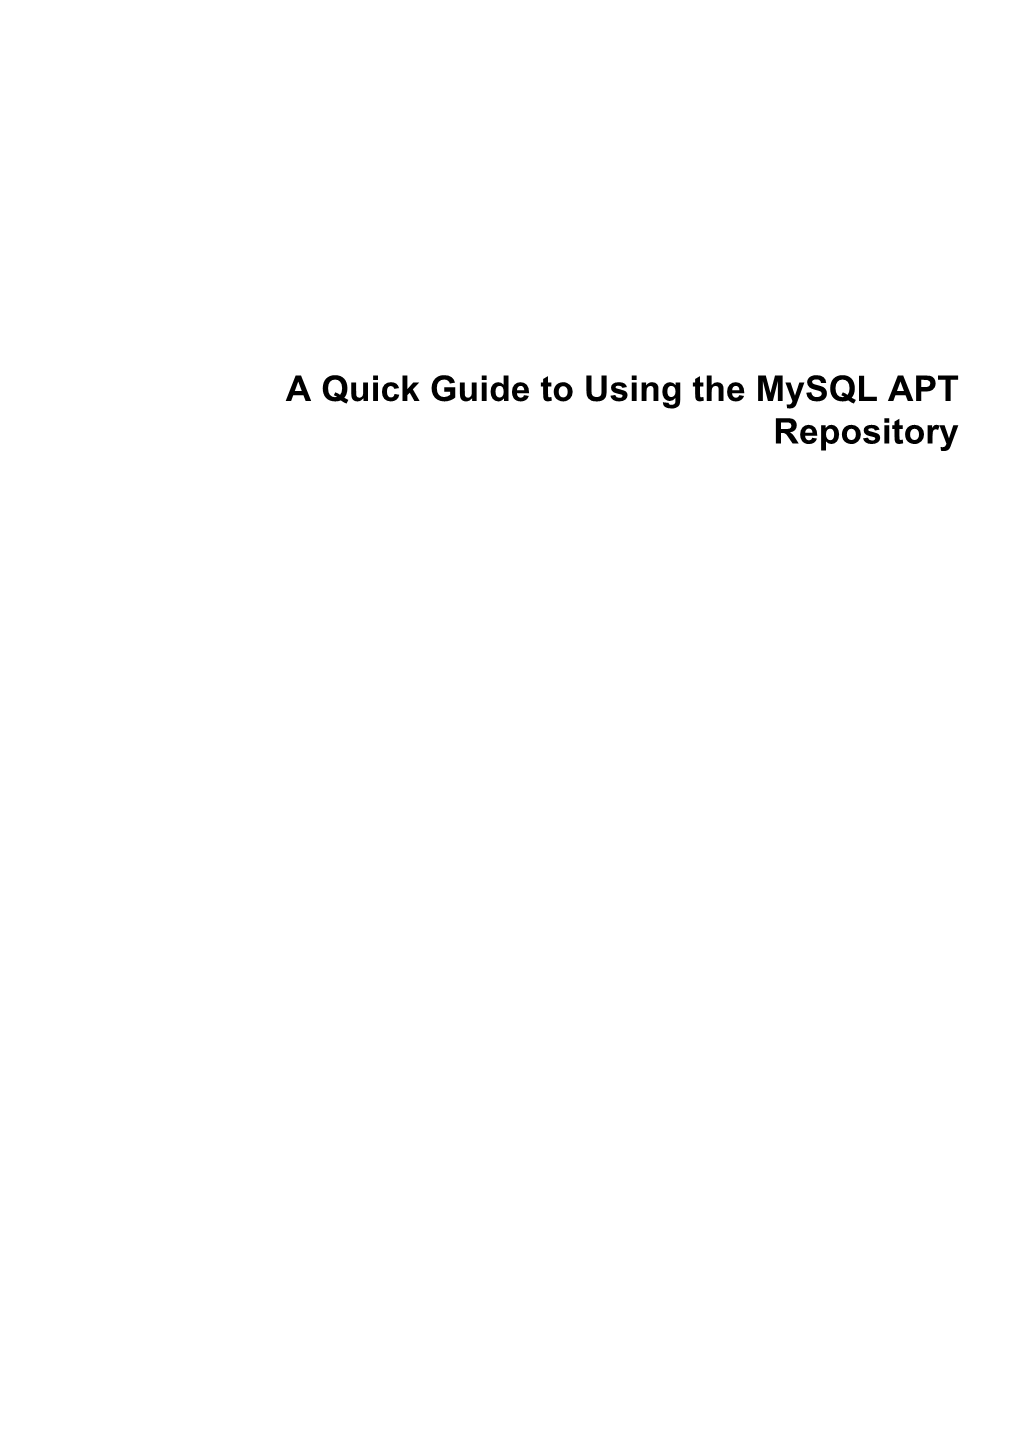 A Quick Guide to Using the Mysql APT Repository Abstract